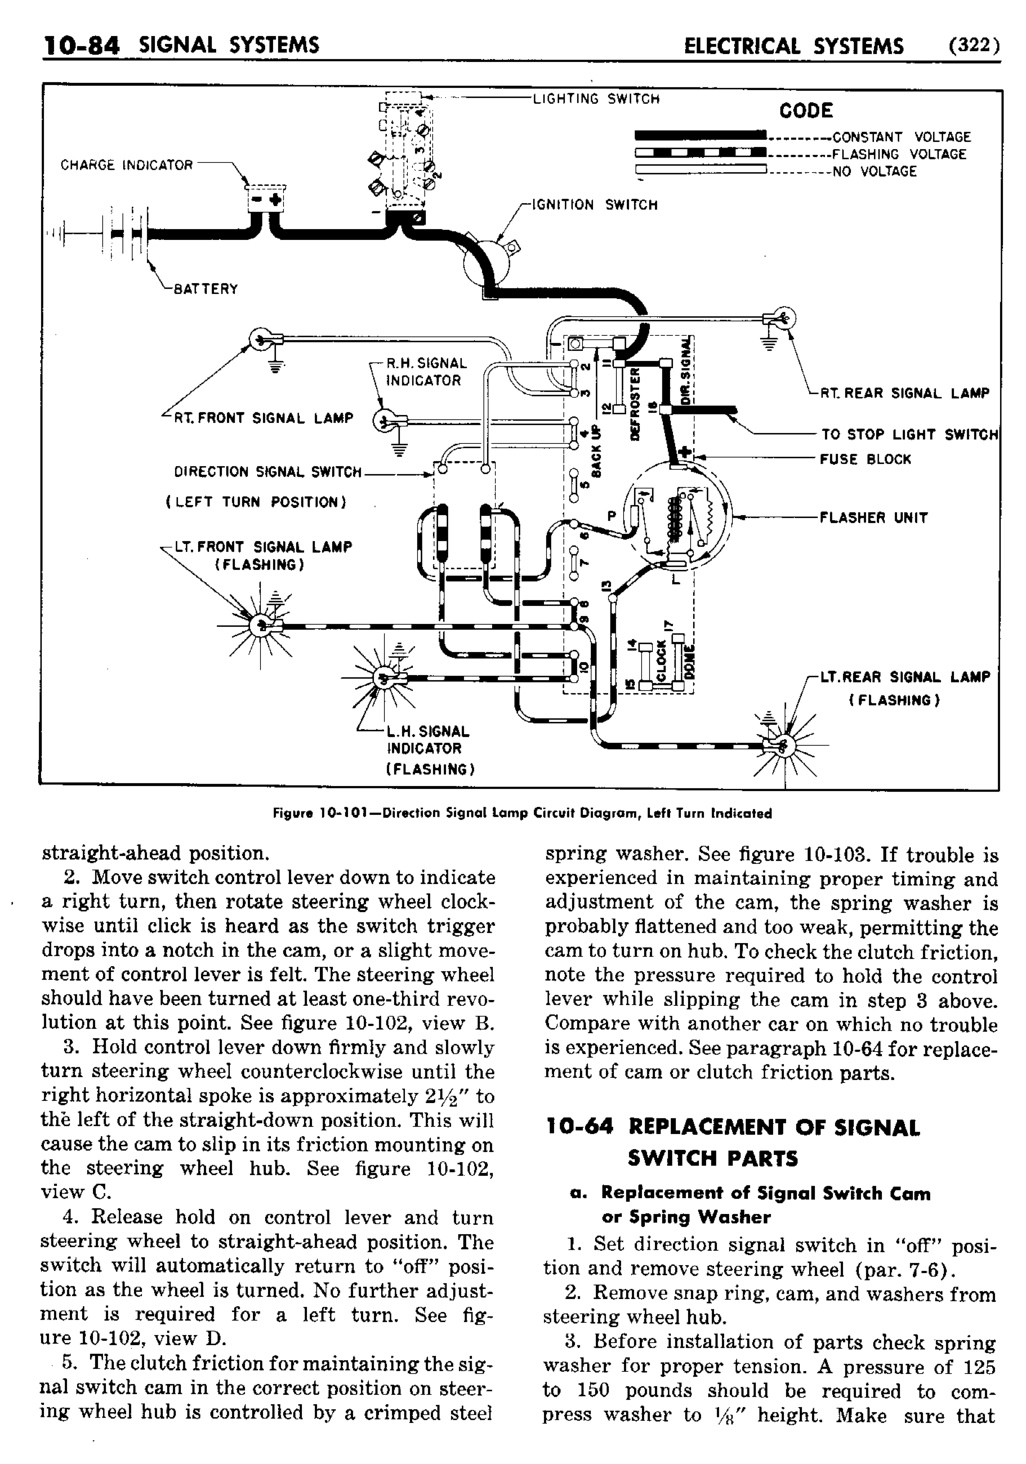 n_11 1950 Buick Shop Manual - Electrical Systems-084-084.jpg